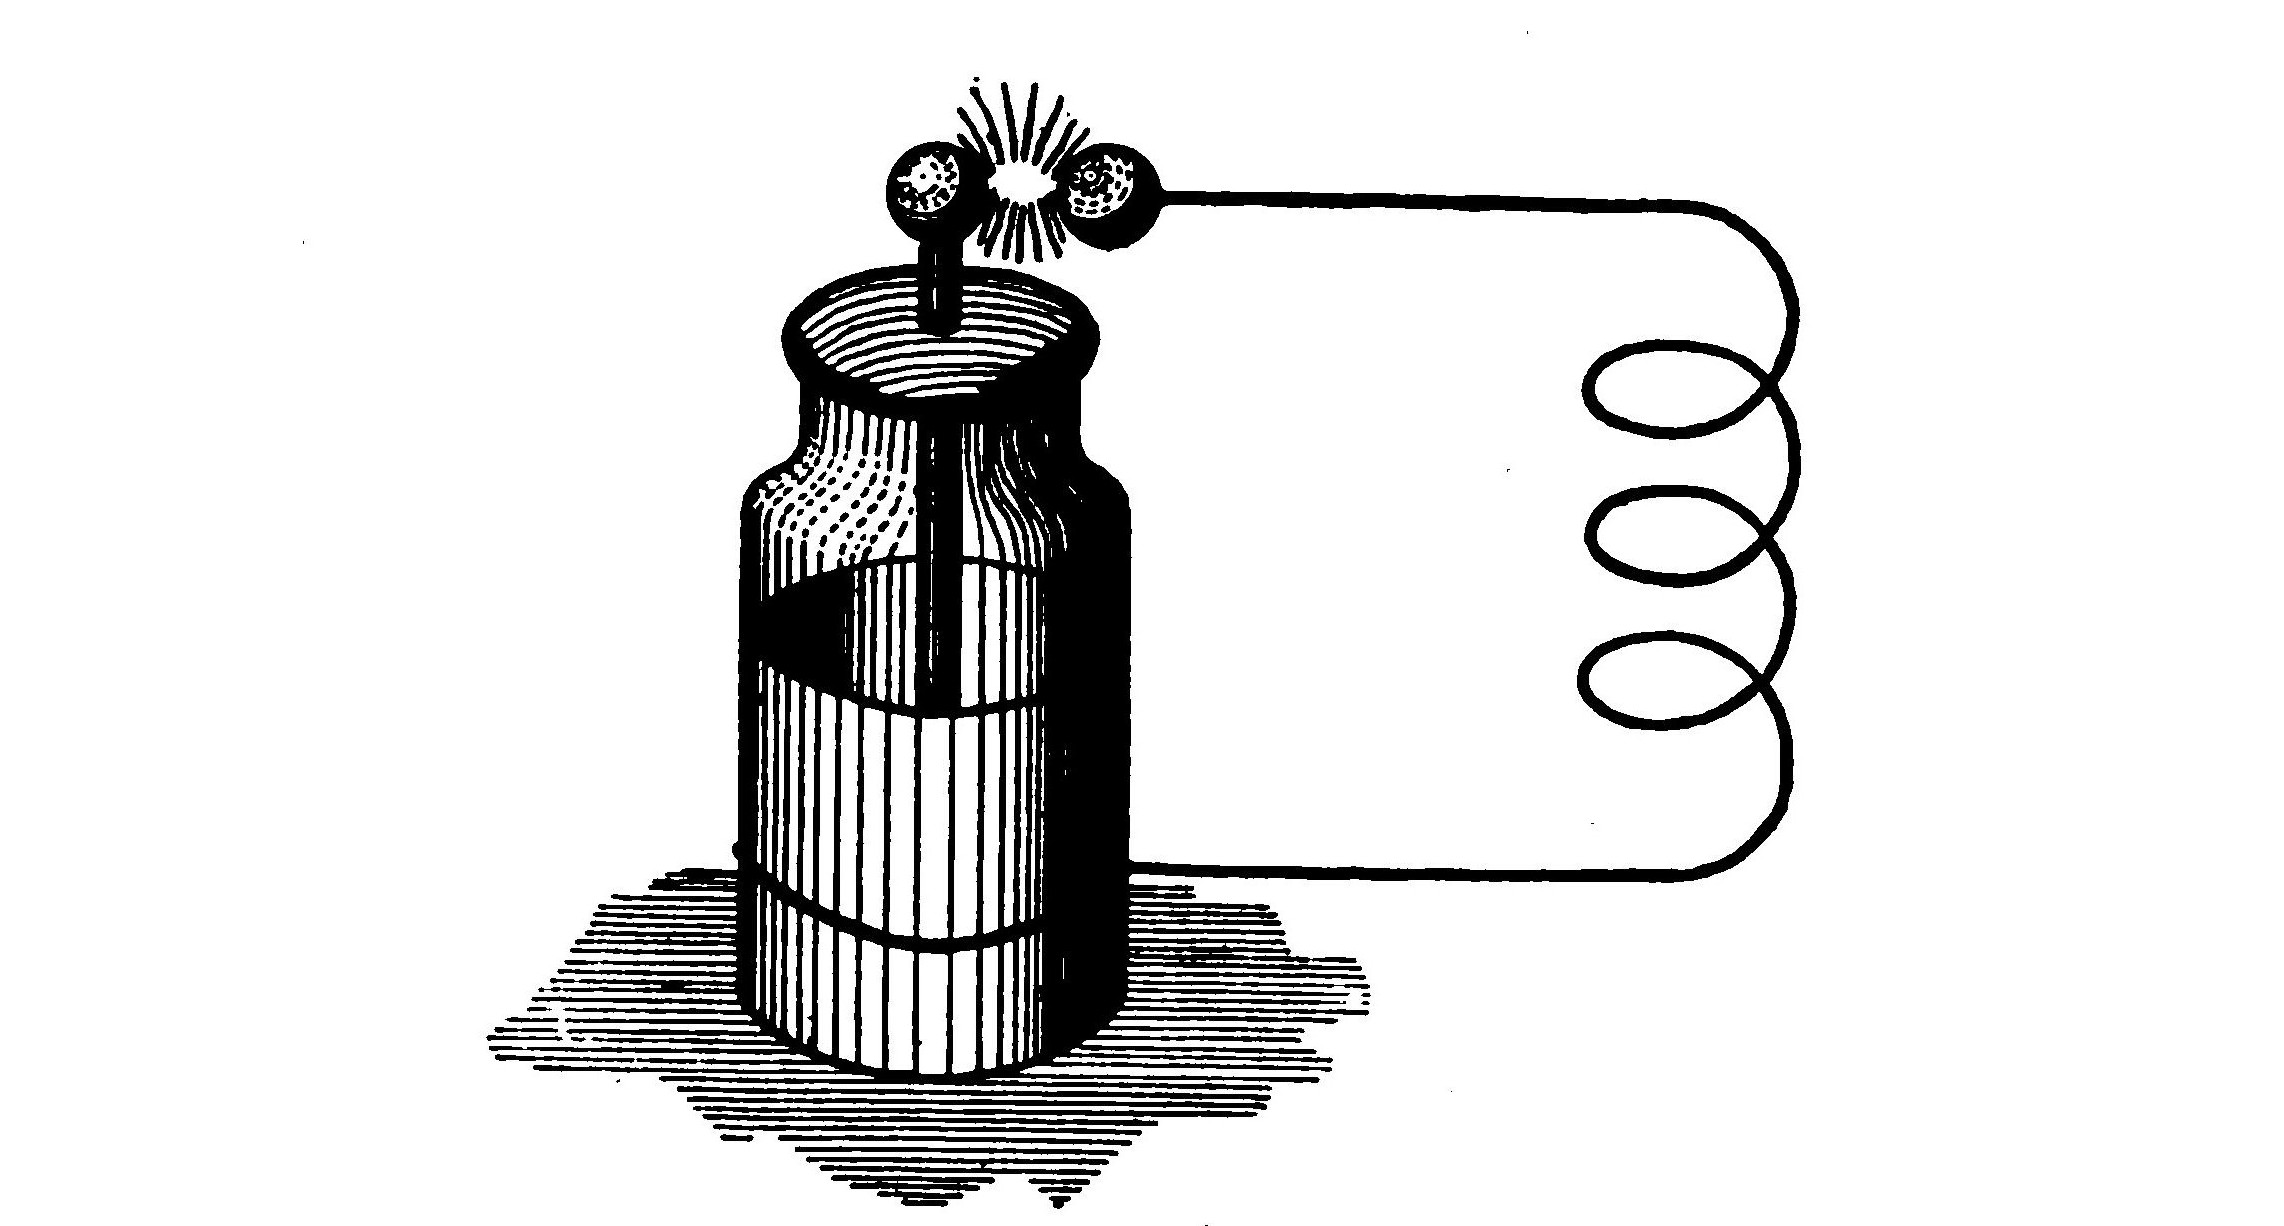 FIG. 4.—A Leyden jar discharging through a coil of wire produces a brilliant spark and high frequency oscillations are created.